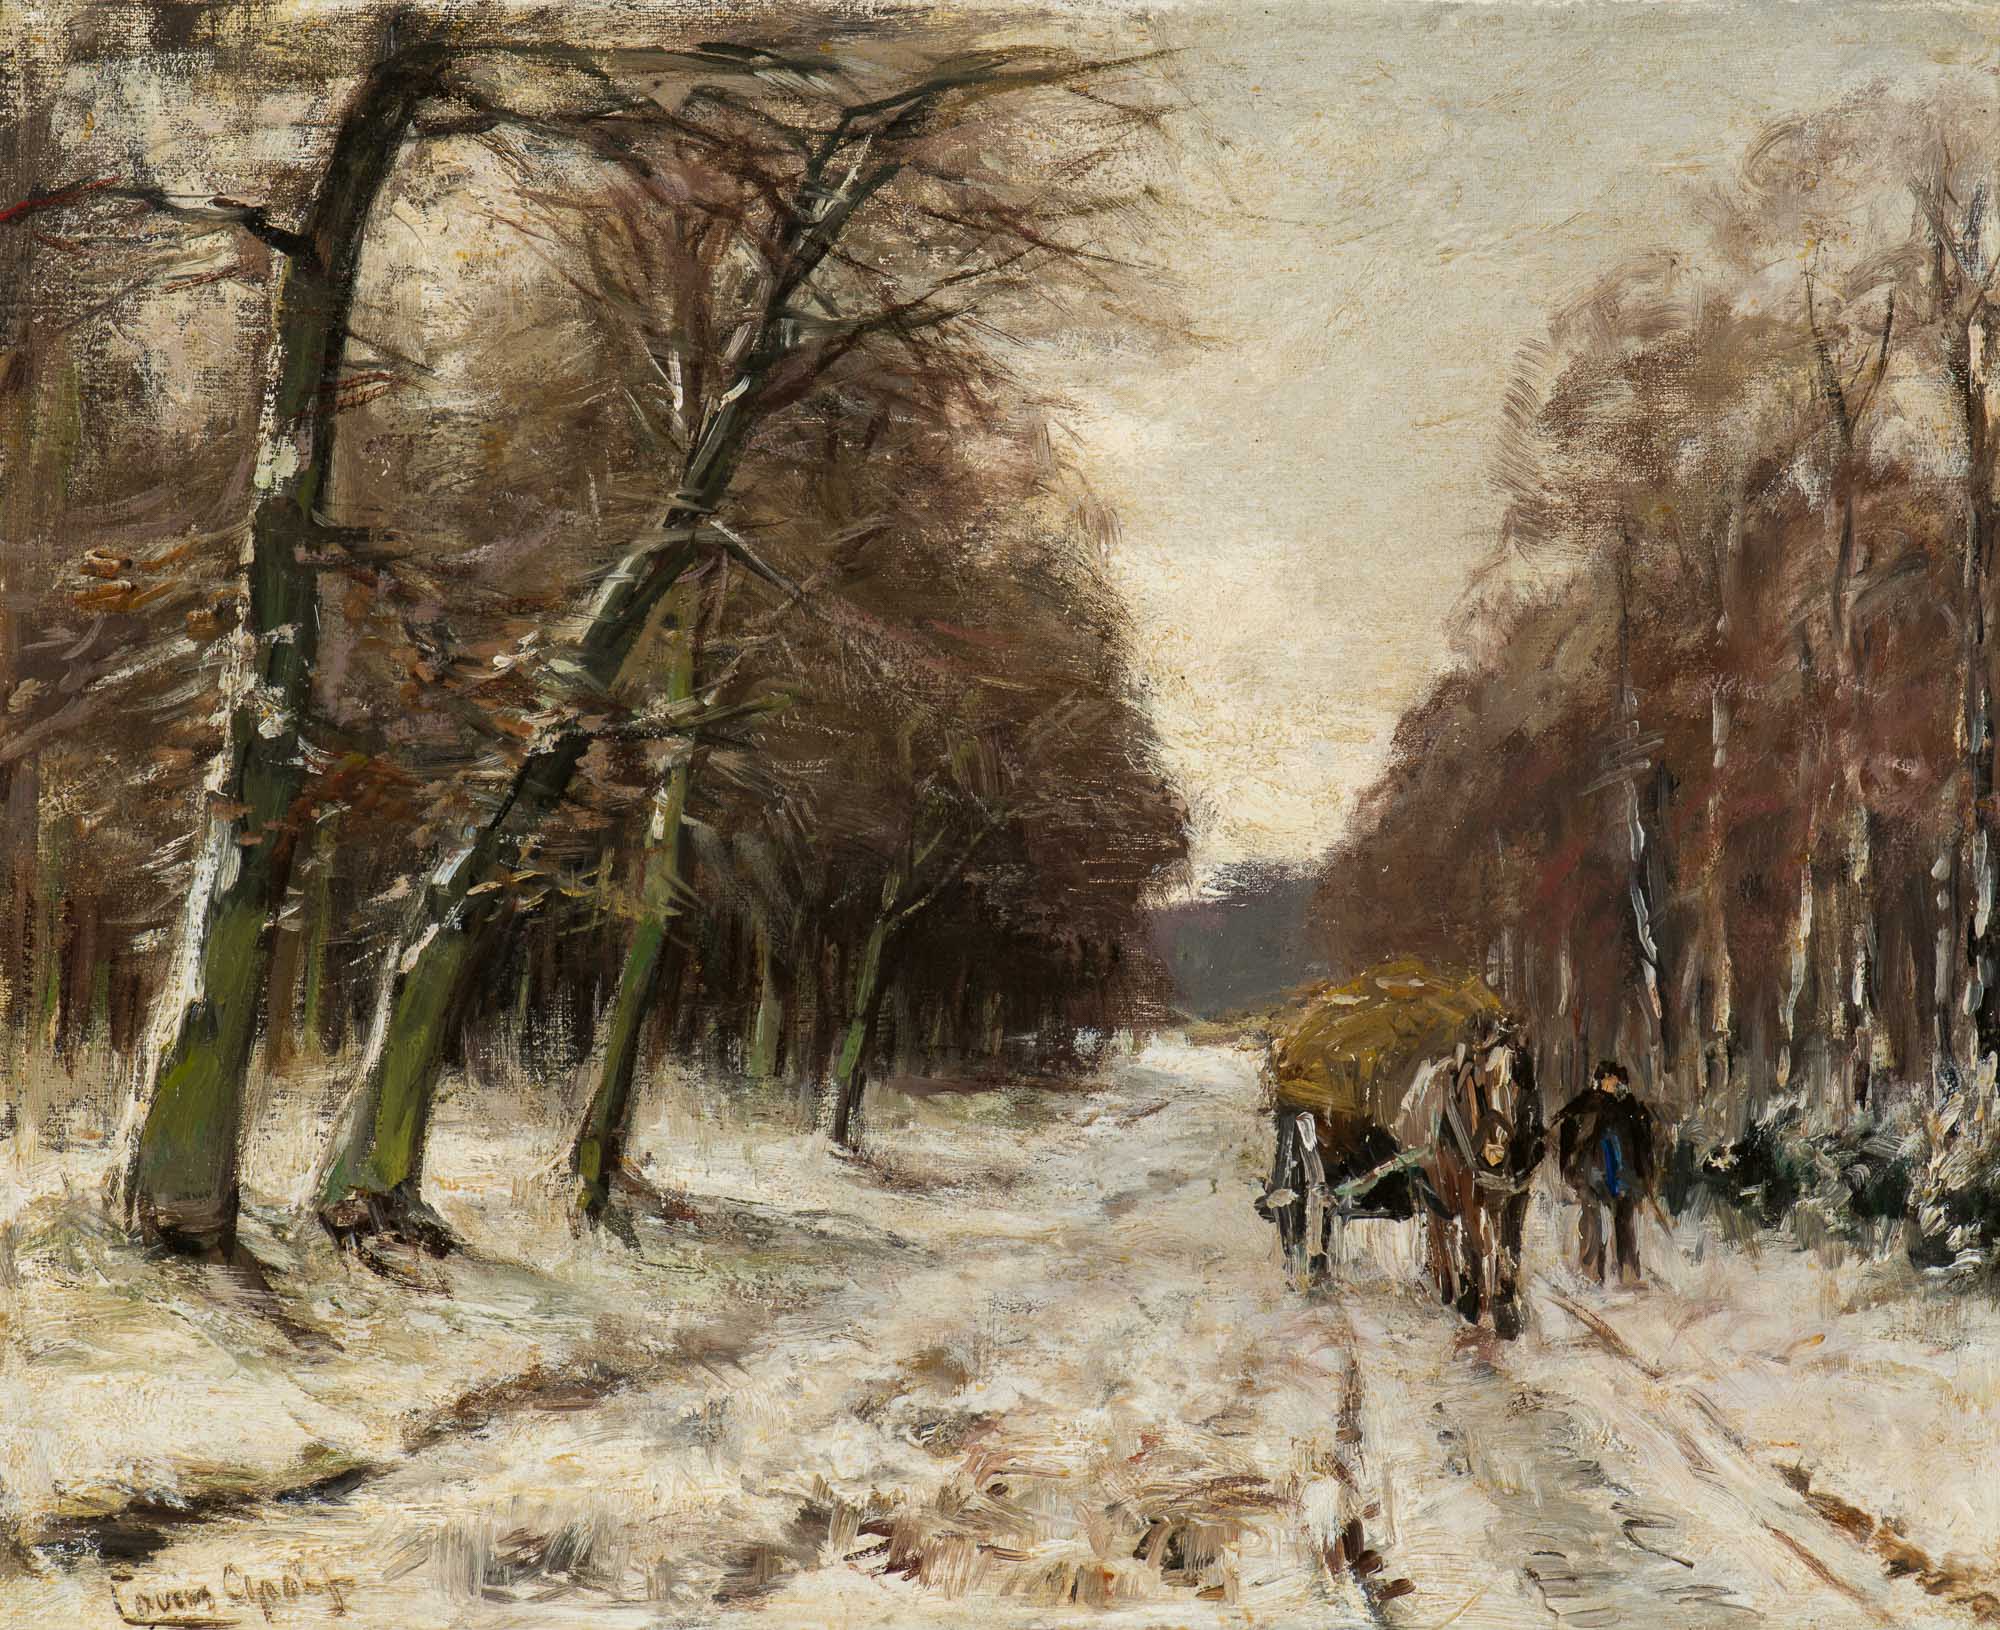 Man with hay cart in the snow